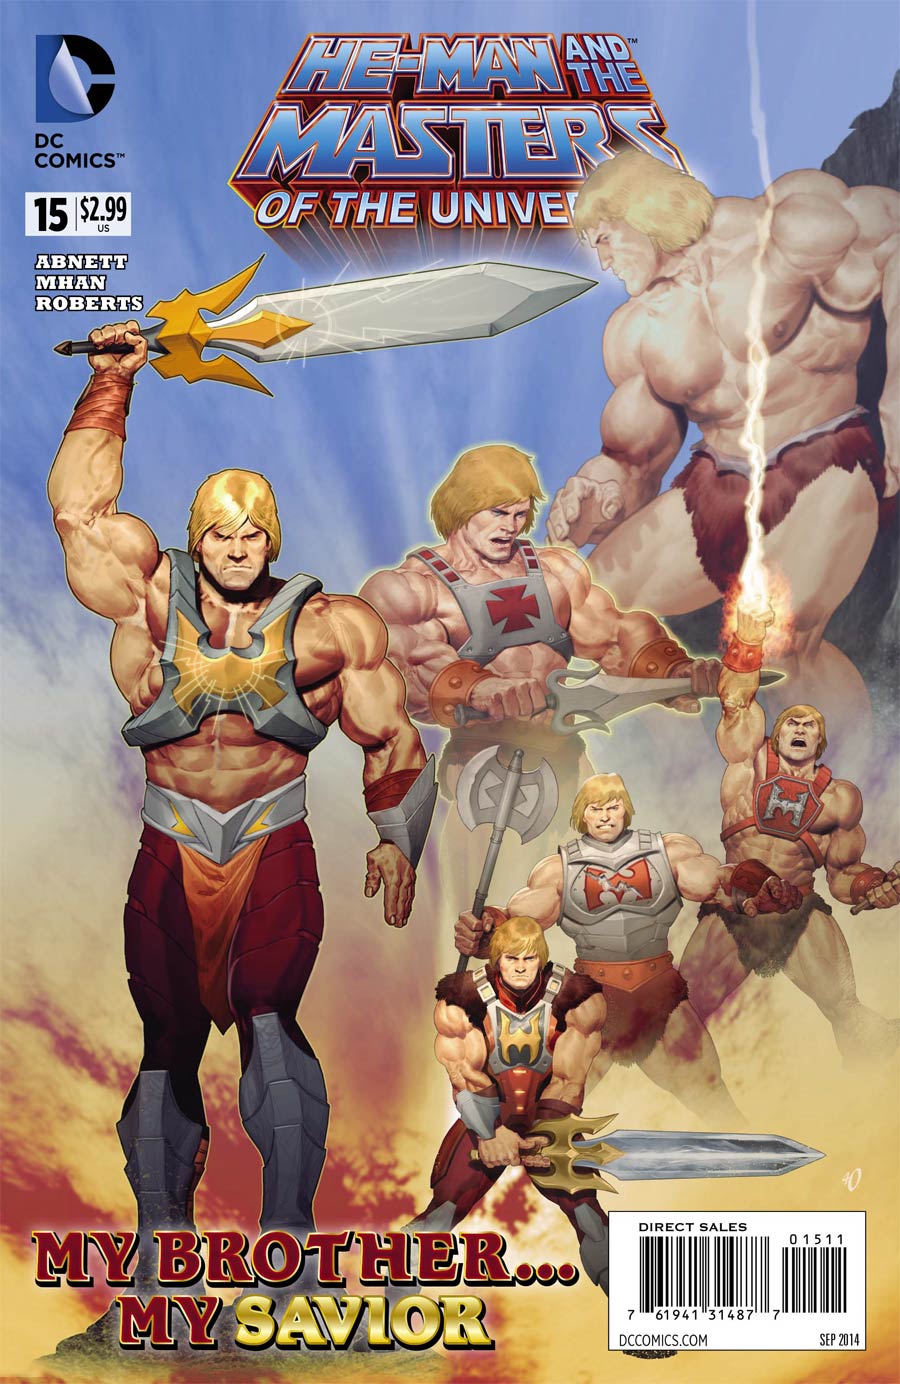 He-Man And The Masters Of The Universe Vol 2 #15